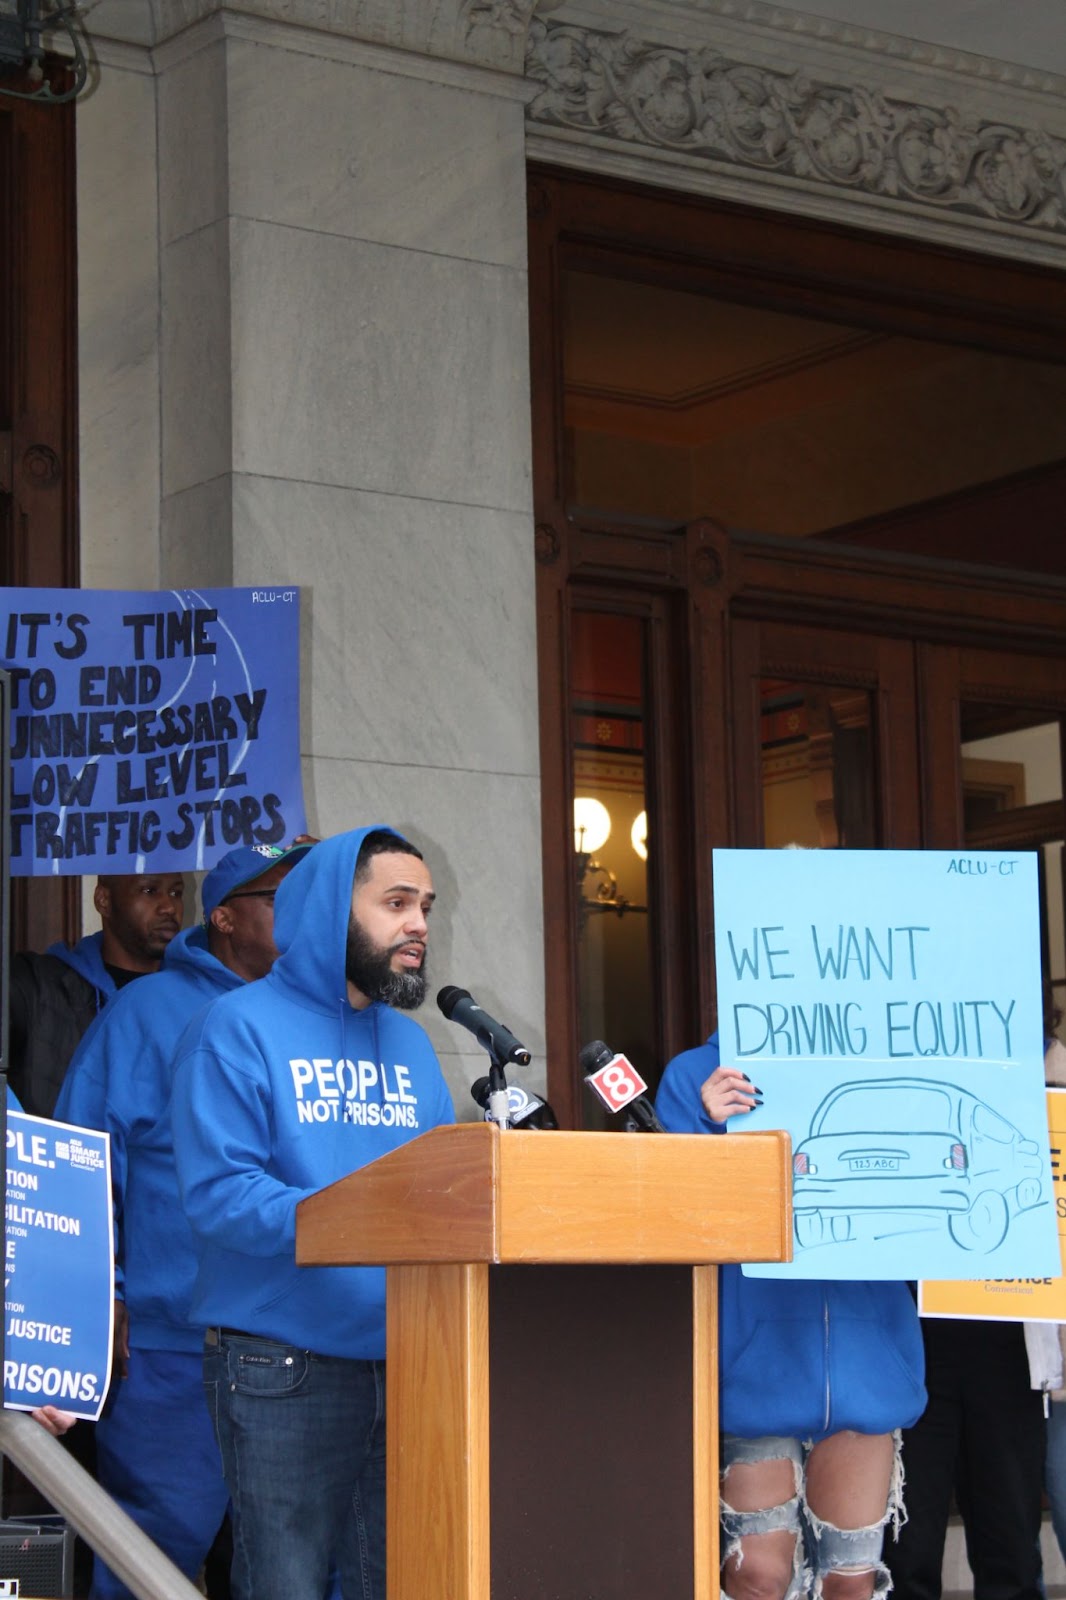 An ACLU of CT Smart Justice leader speaks at a rally at the capitol building in Hartford, Connecticut. He stands in front of signs that say "We want driving equity" and "It's time to end unnecessary low level traffic stops" and other, similar signage.